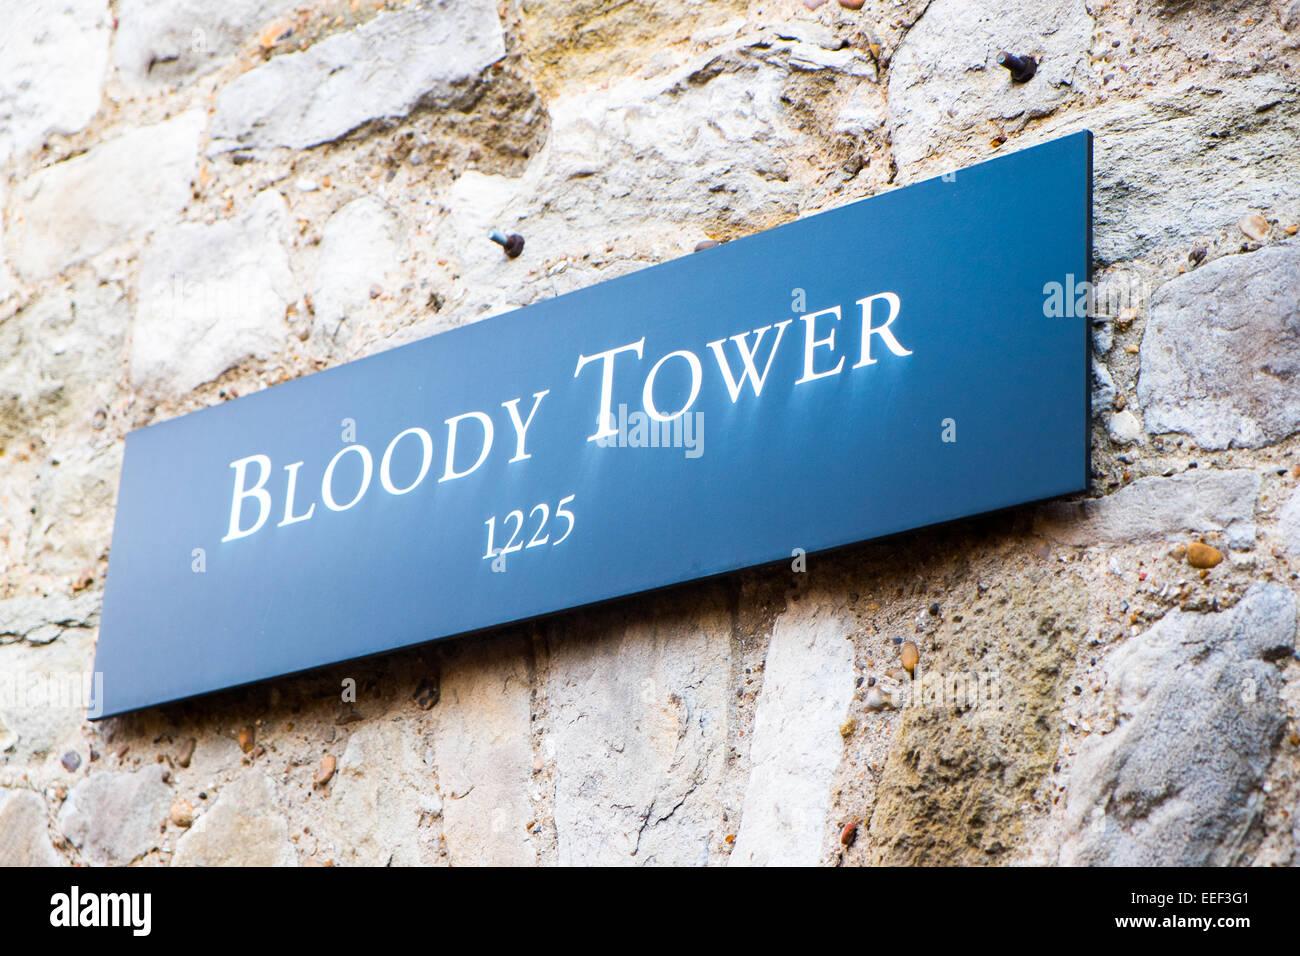 Sign on the bloody tower at the Tower of London, London,England Stock Photo